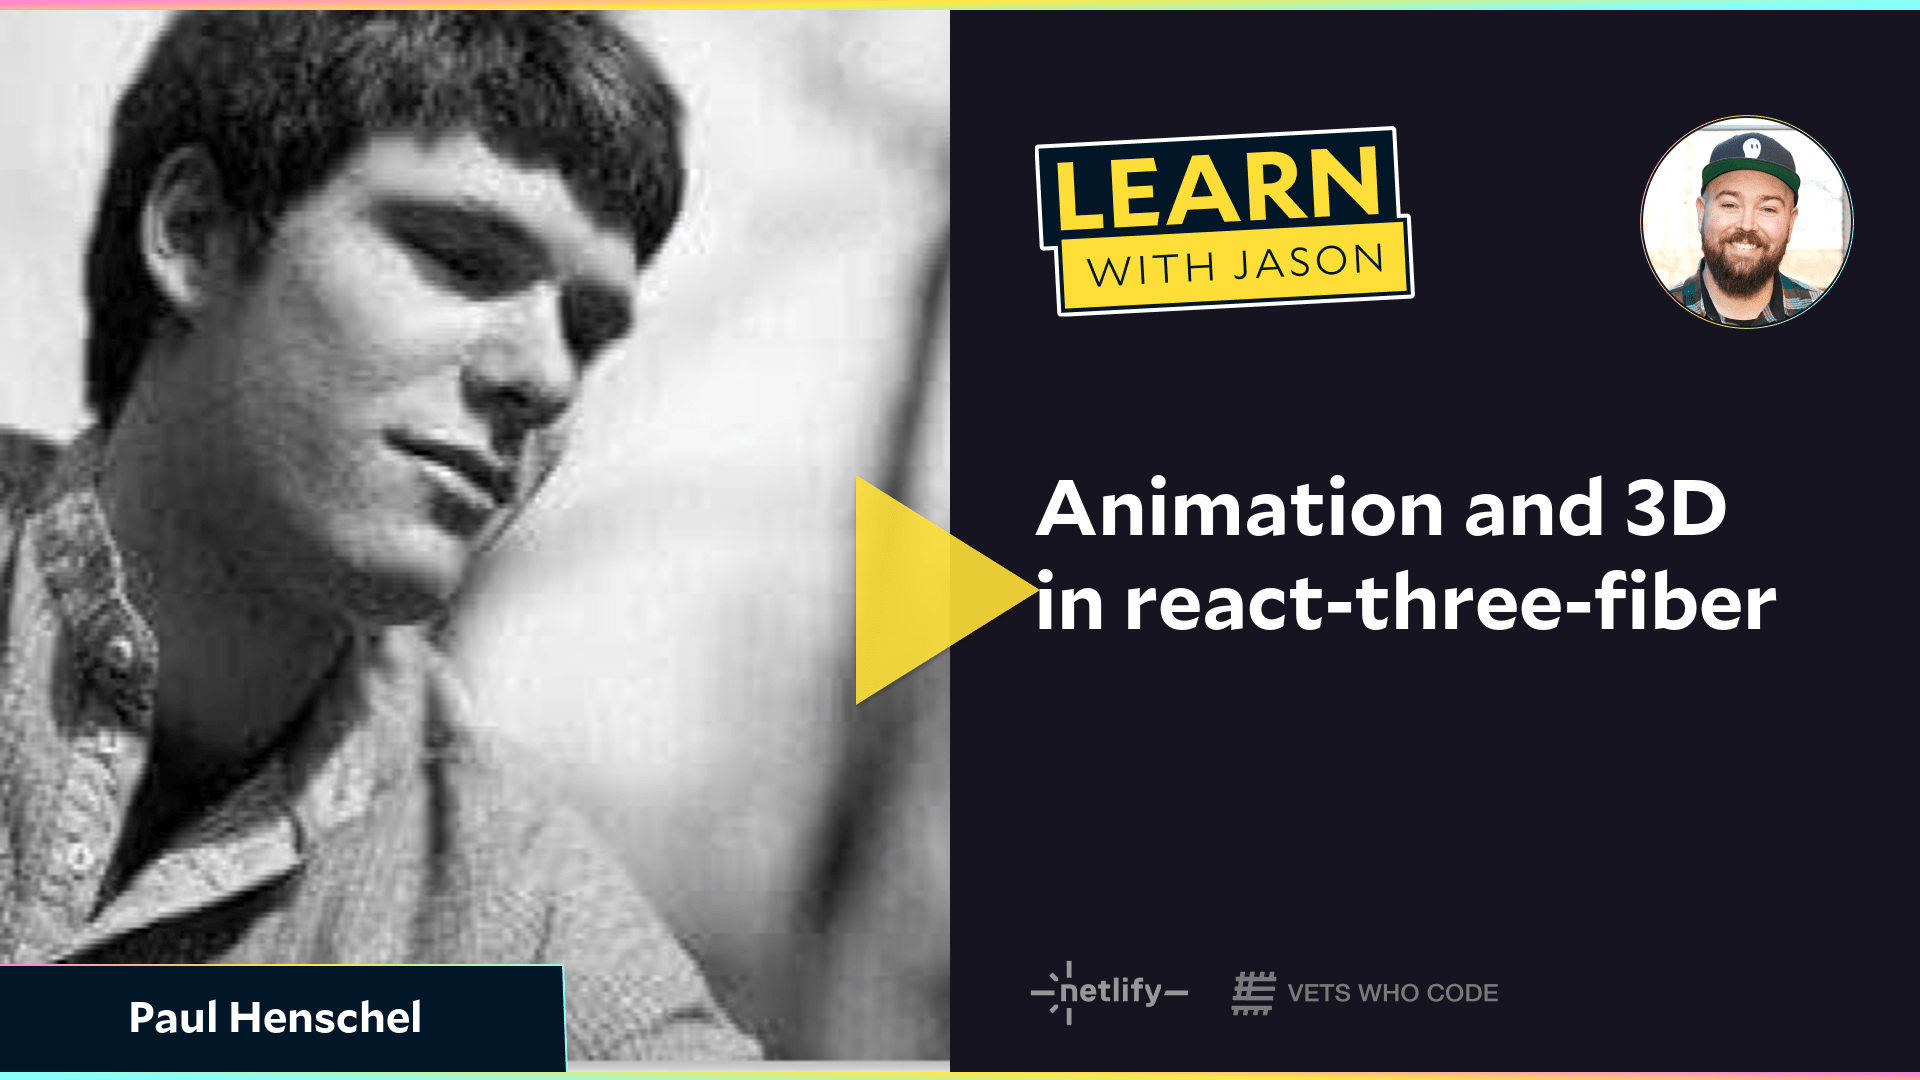 Animation and 3D in react-three-fiber (with Paul Henschel)